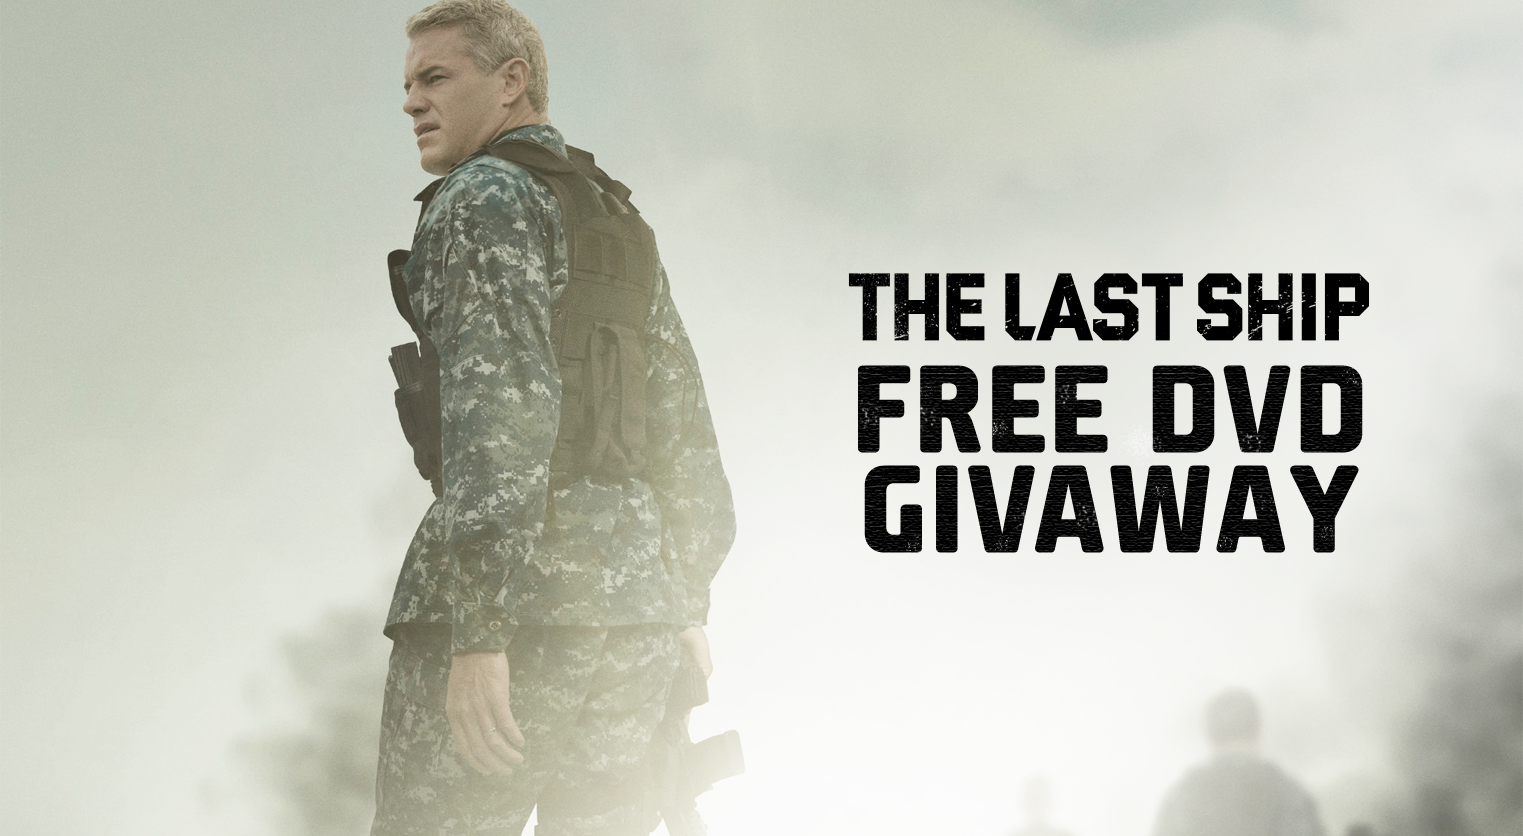 The Last Ship Giveaway